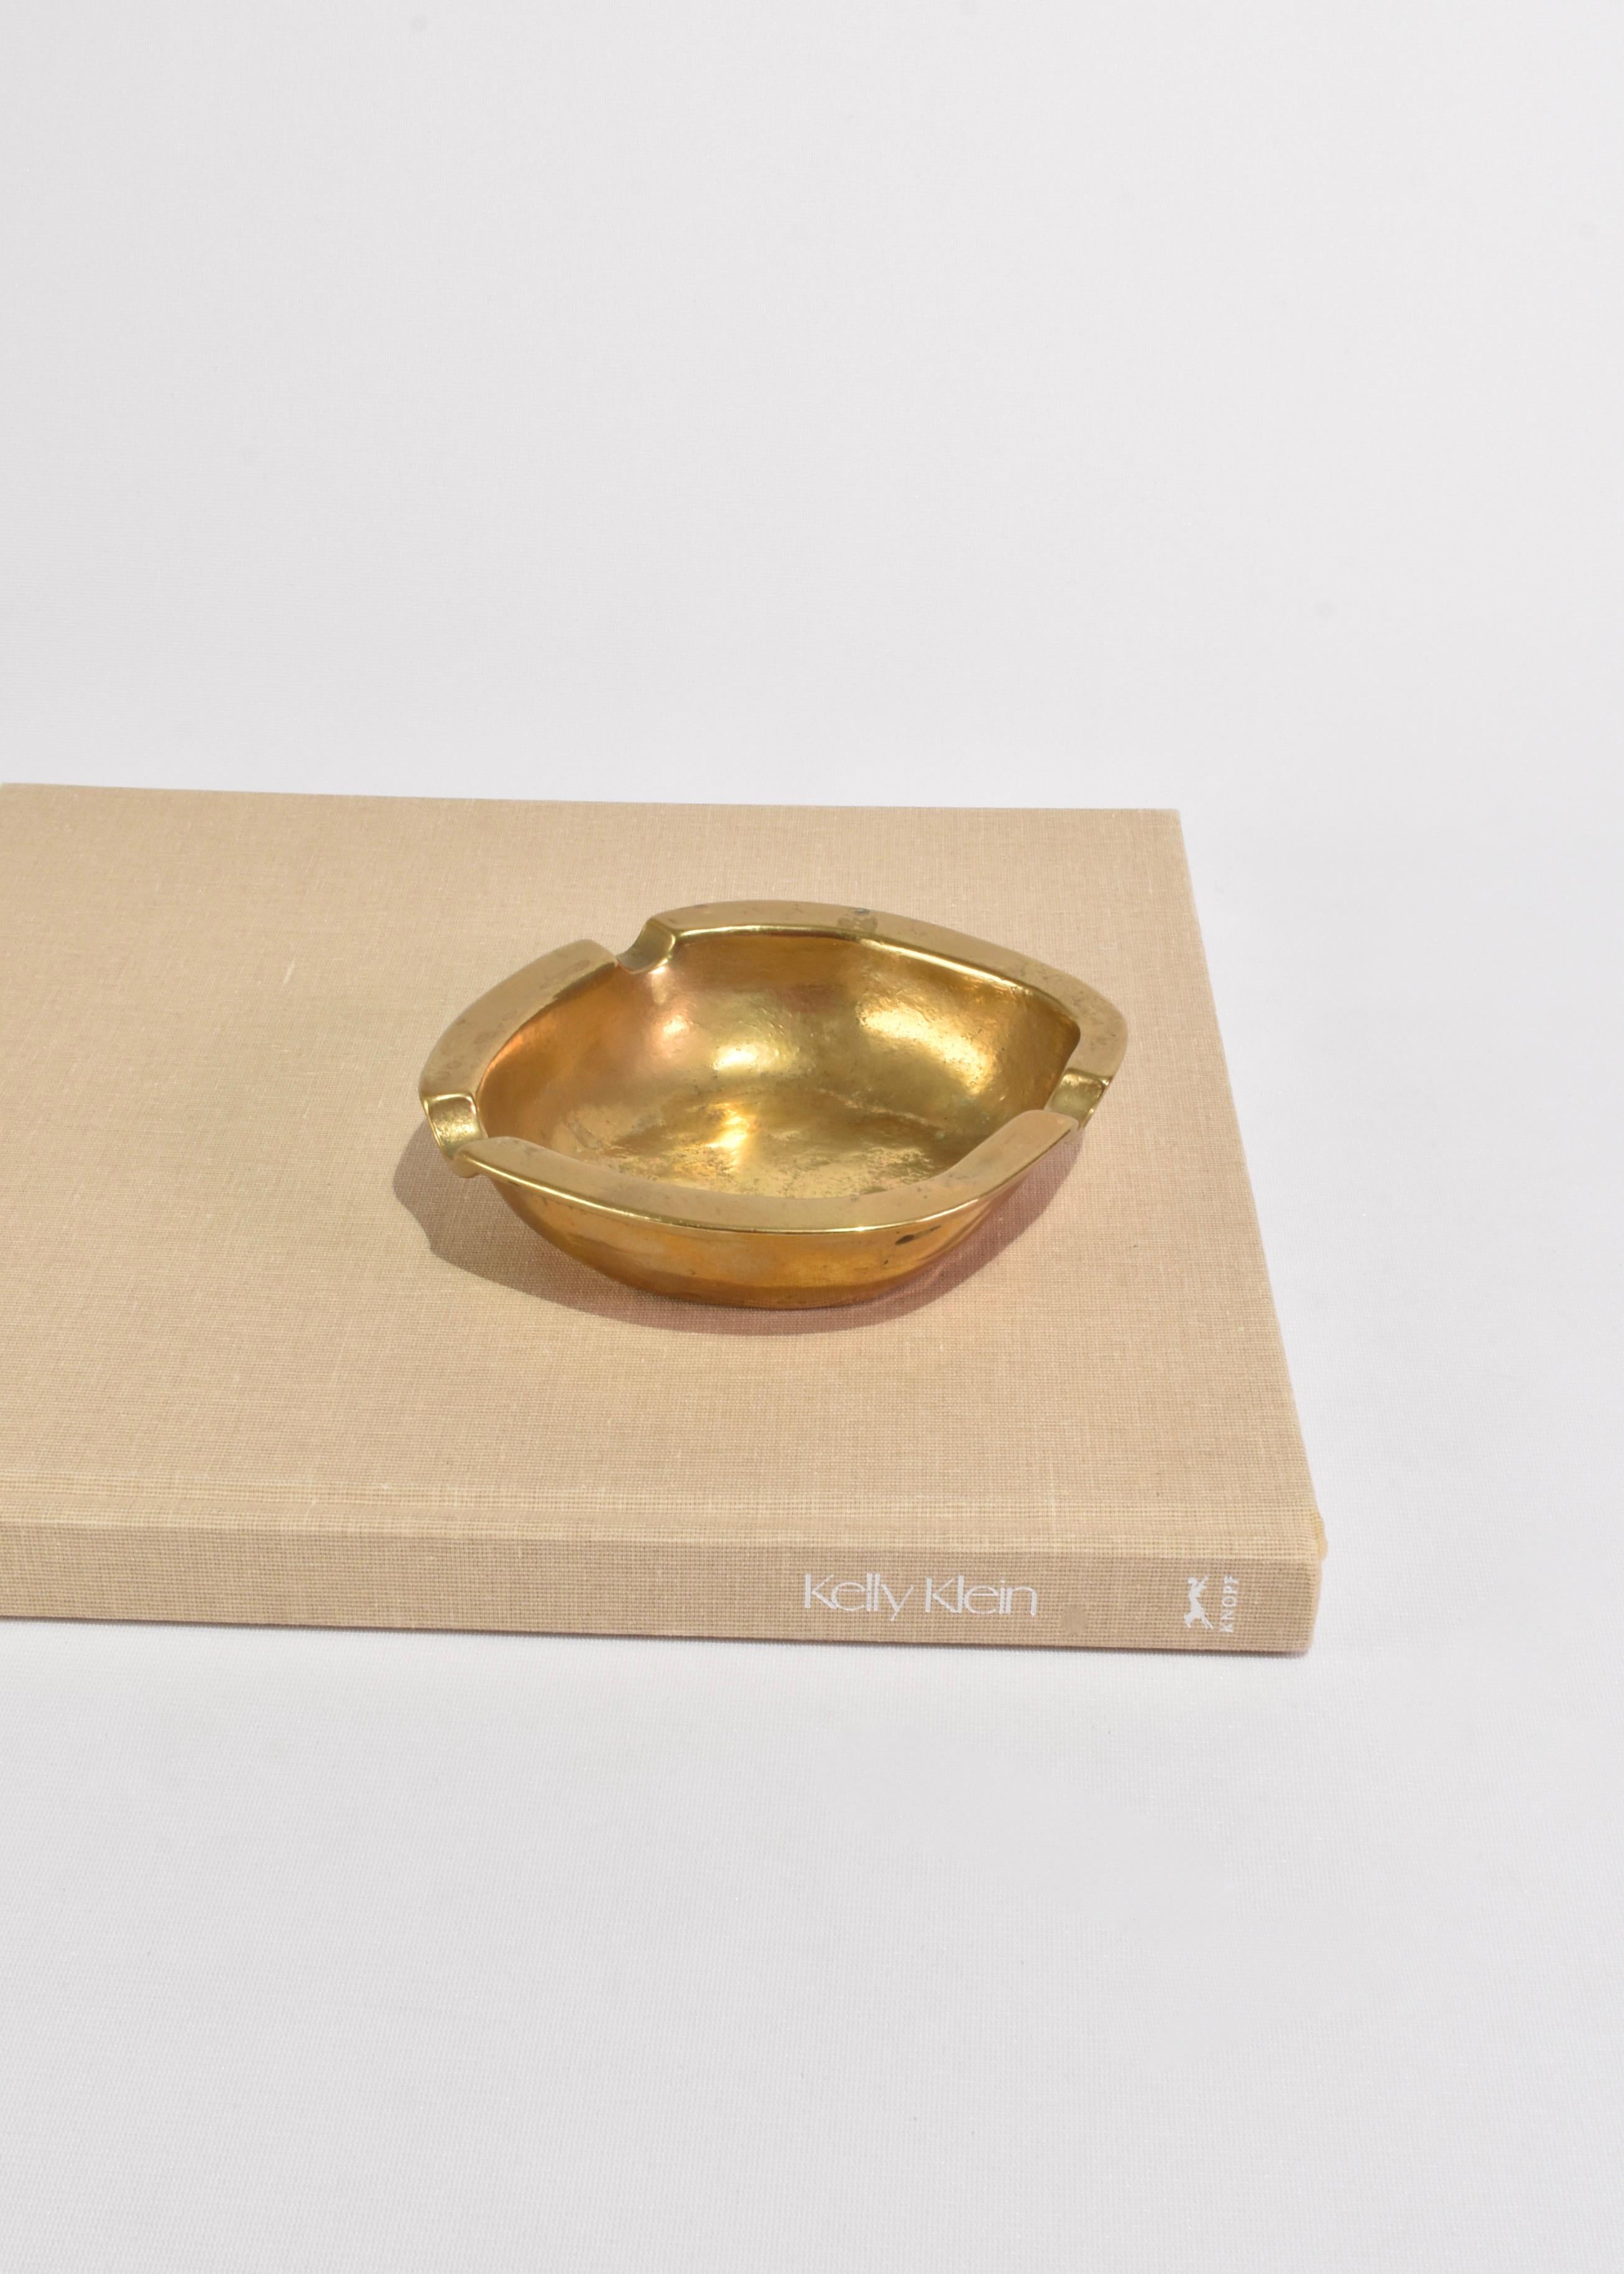 Stunning, vintage cast bronze catchall or ashtray.